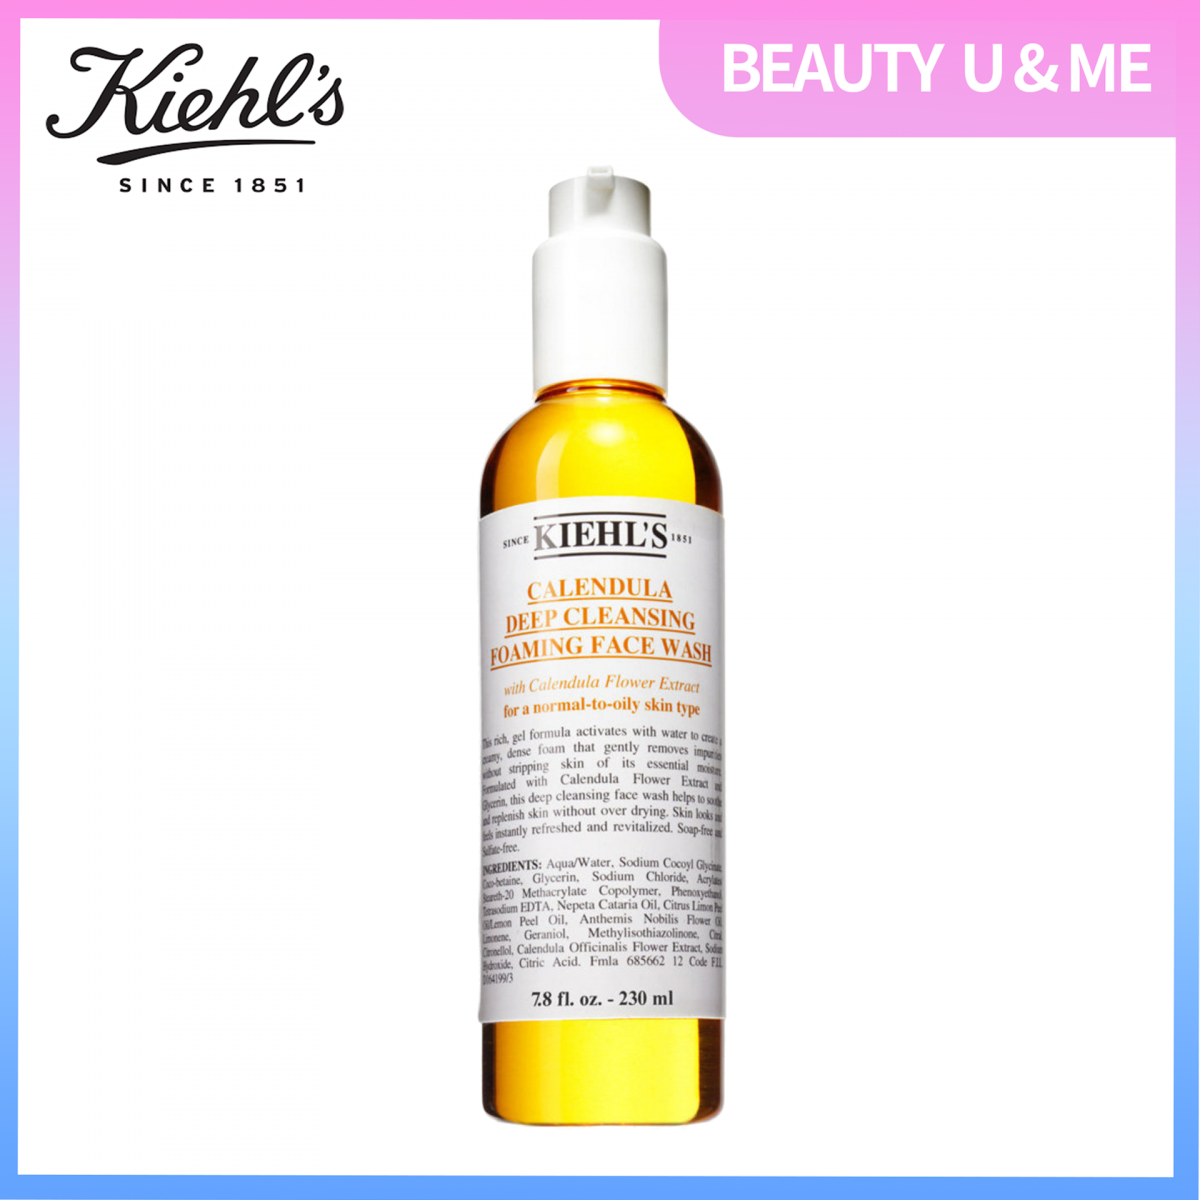 Kiehl's Calendula Deep Cleansing Foaming Face Wash 230ml [Parallel Import]